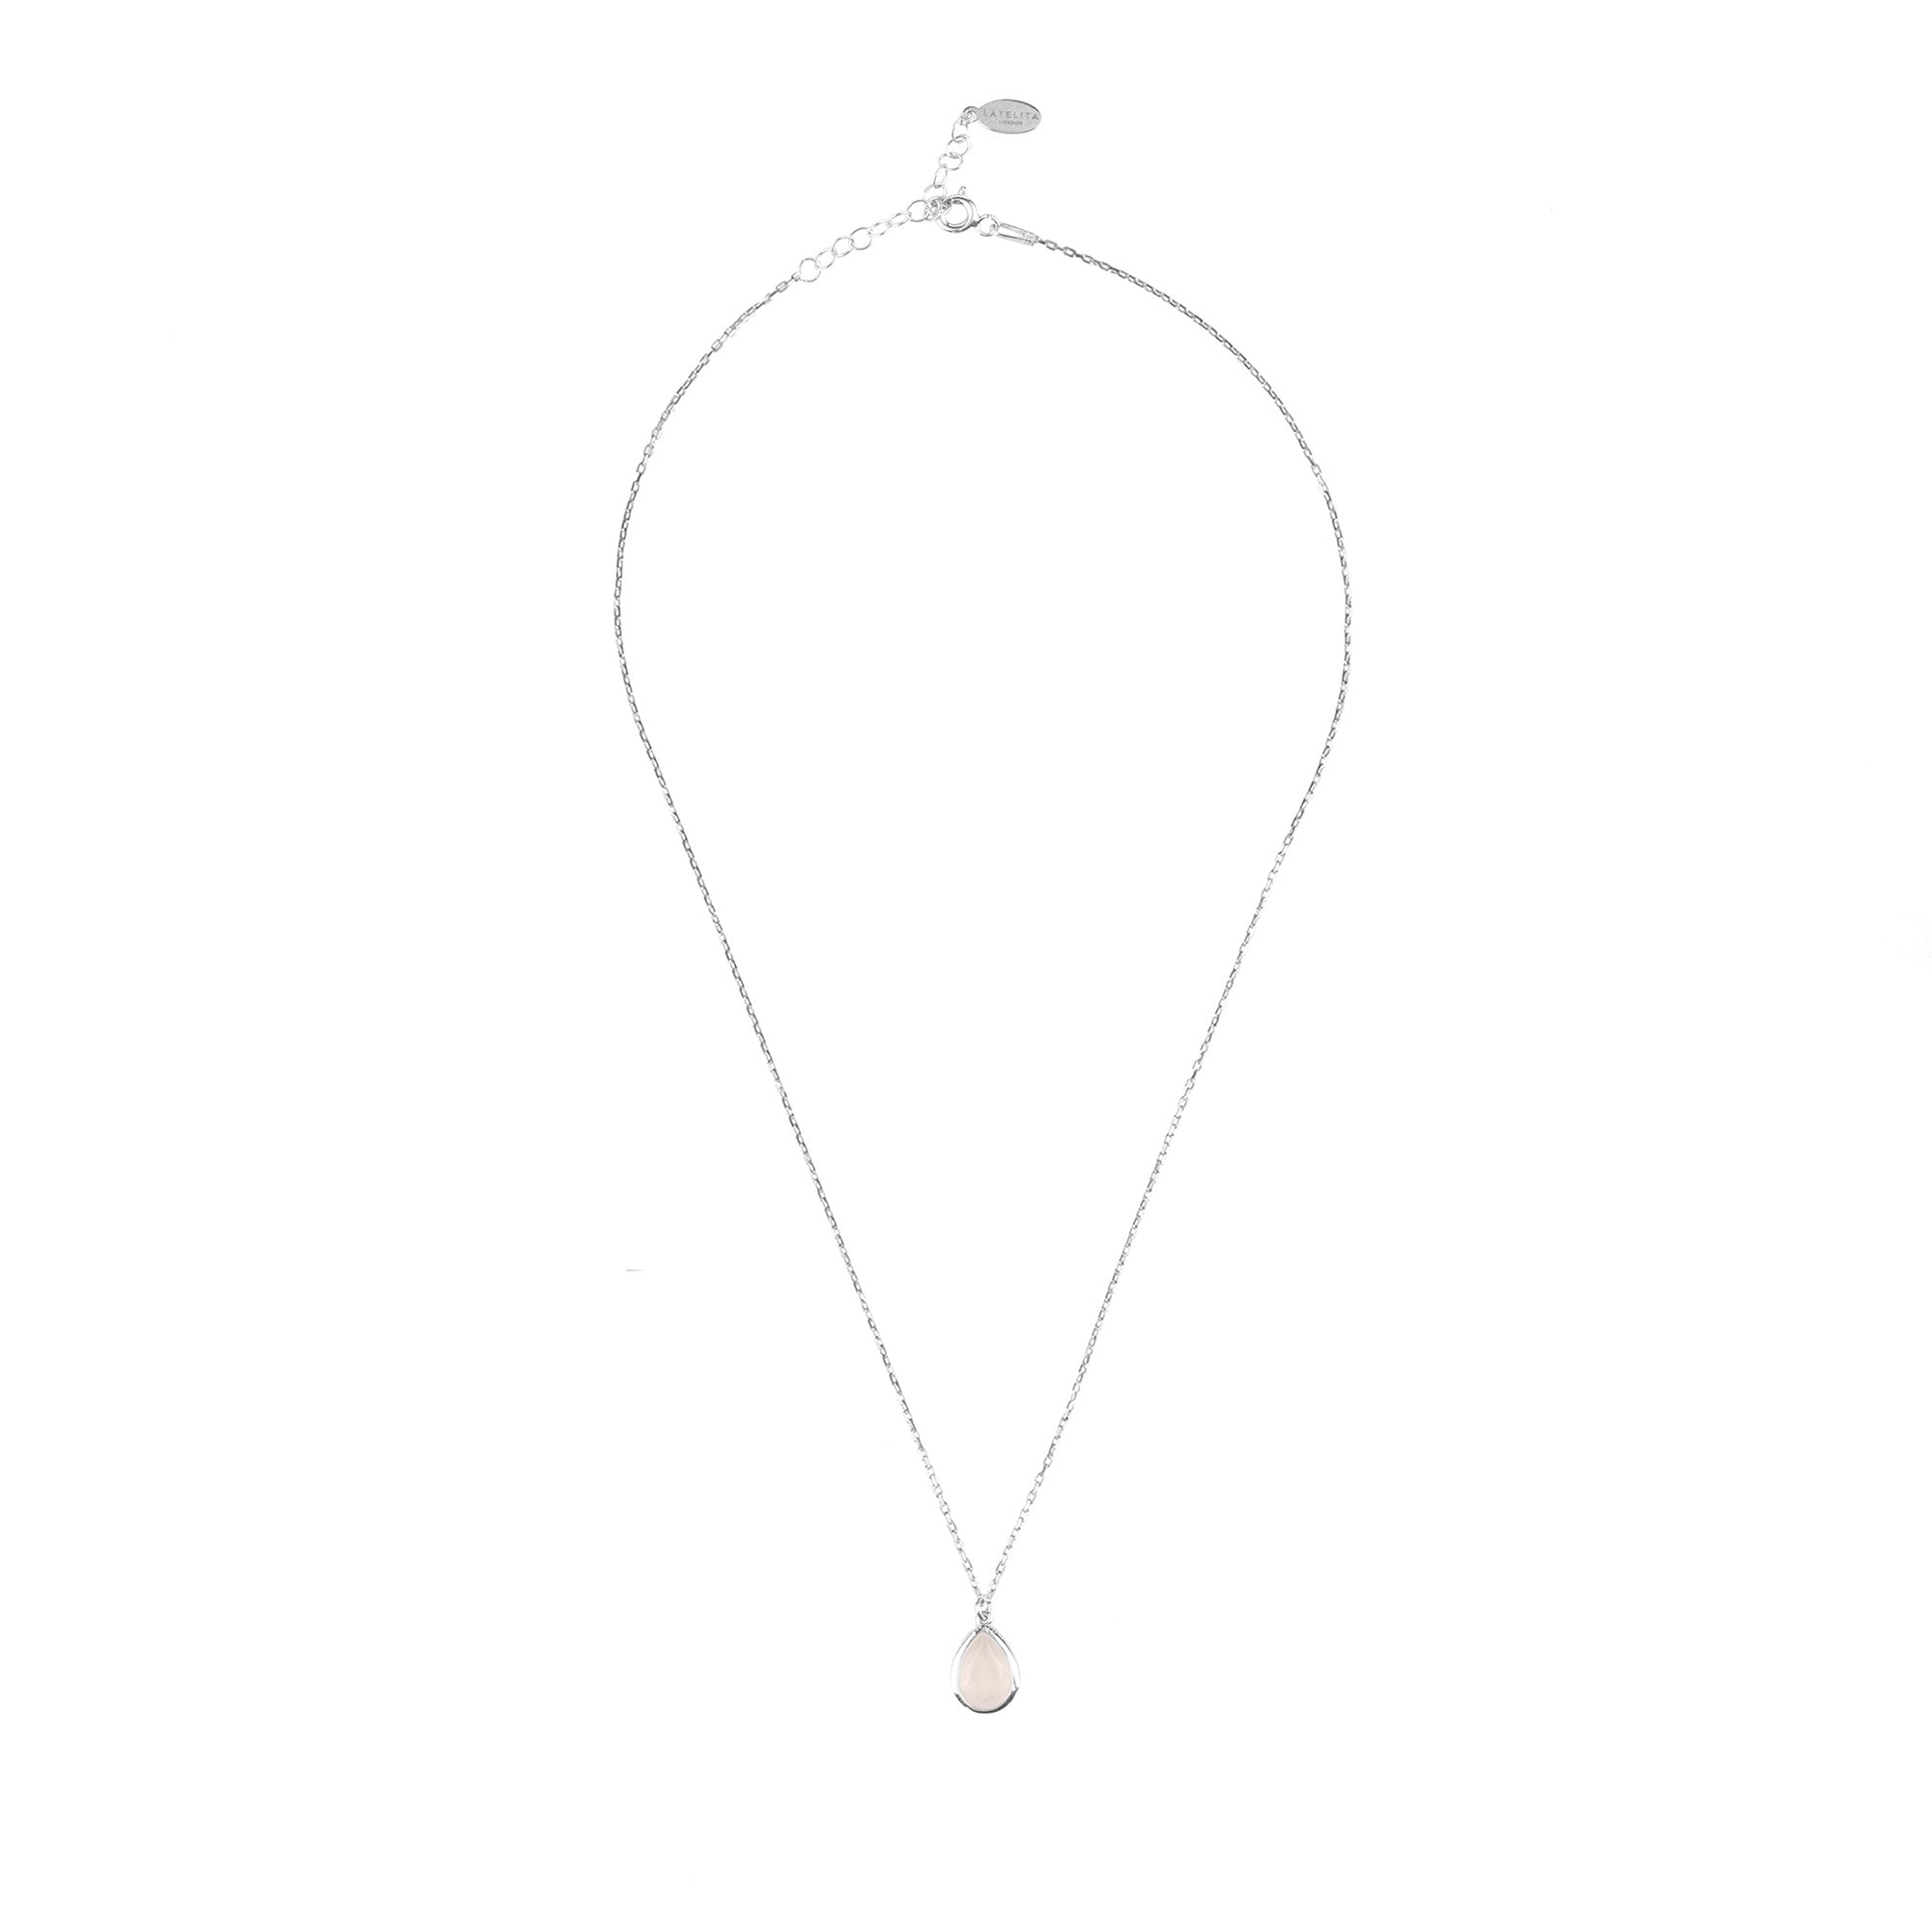 Rose Quartz Mini Teardrop Pendant Necklace - Sterling Silver Capri Collection Jewelry - Ideal Gift for Birthdays and Bridesmaids - Accessories - Bijou Her -  -  - 